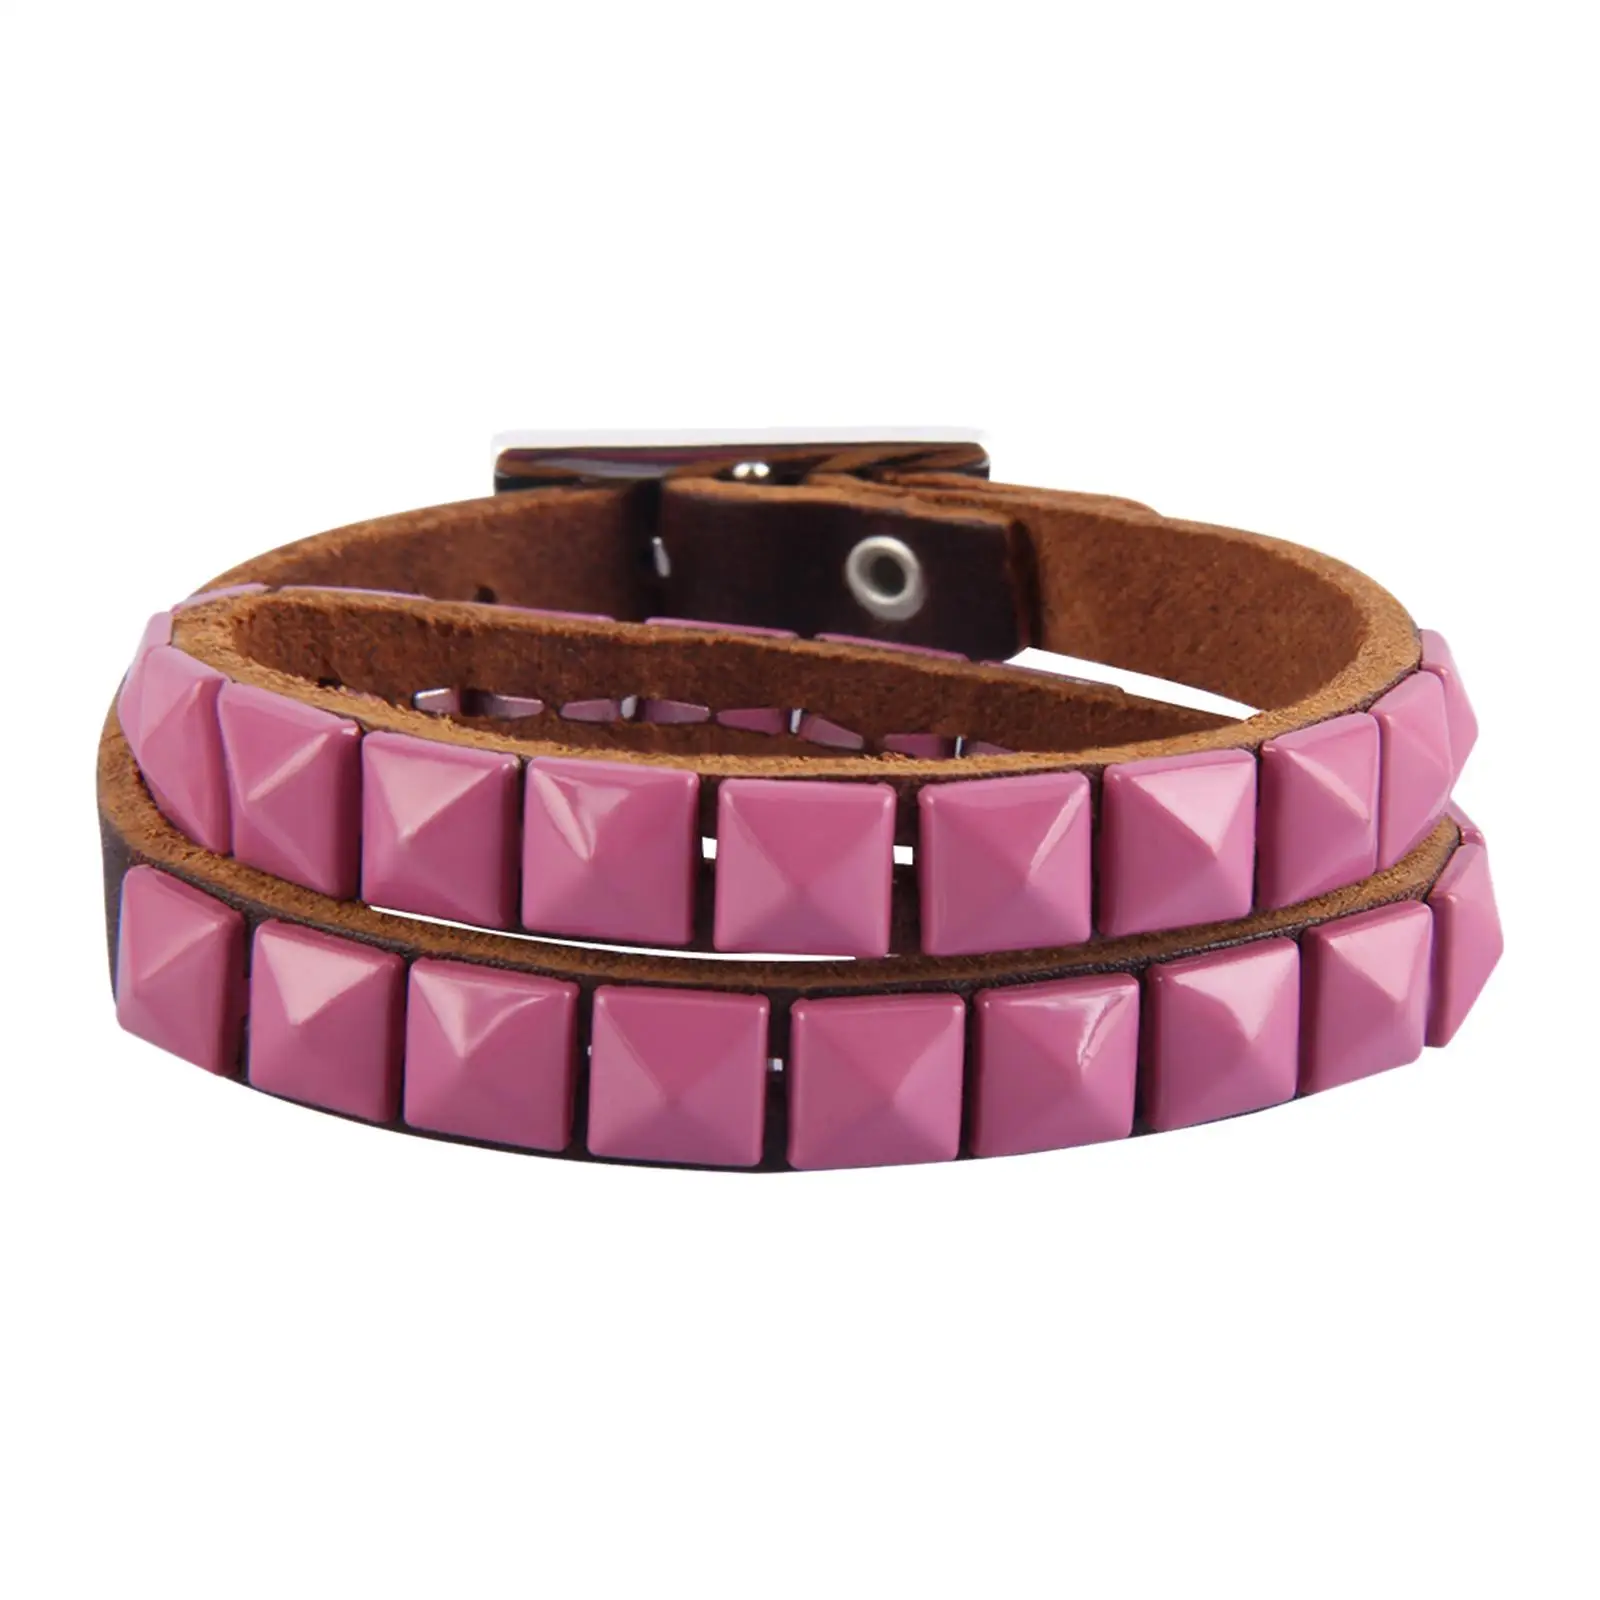 Gothic Punk Rock Studded Bracelet Wide Thick Adjustable PU Leather Wristband Jewelry for Party Favors Men Women Halloween